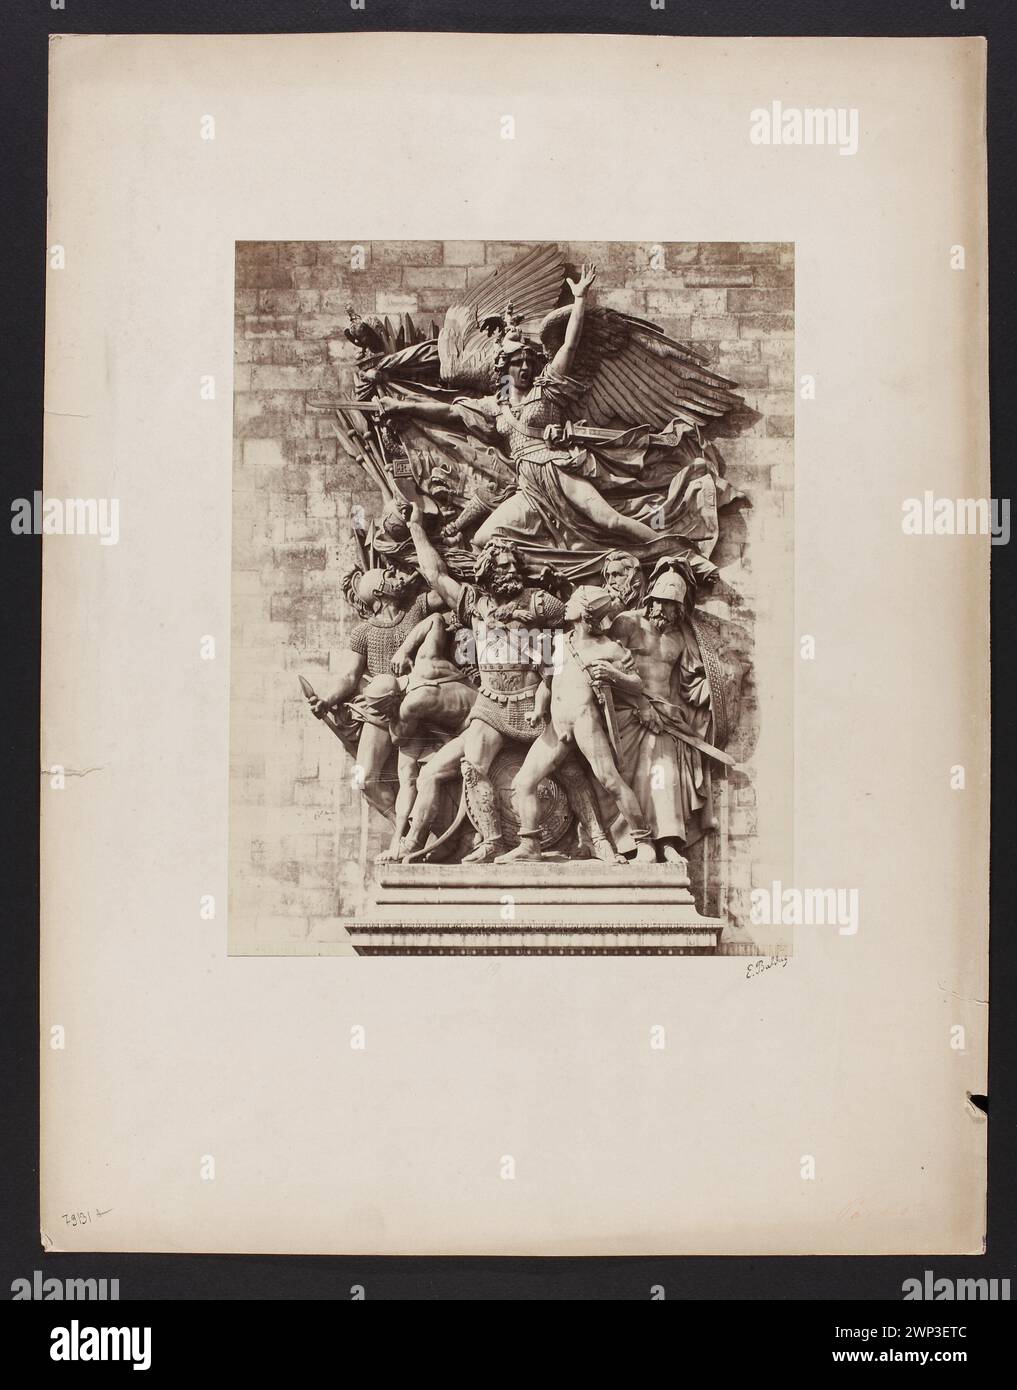 Marseilleka '(' Departure of volunteers in 1792 ')-Ploty 1862 ( Products from Wąkien / Paper / Carton; Photographic Print: height 25.7 cm, width 20.2 cm, sub -pod they.Marseilleka, Paris (France), Rude, François (1784-1855) - reproduction, bas -relief (artist), sculpture (artist), French sculpture, triumphant arch (Paris), photosensitive (Warsaw - exhibition - 2009) Stock Photo